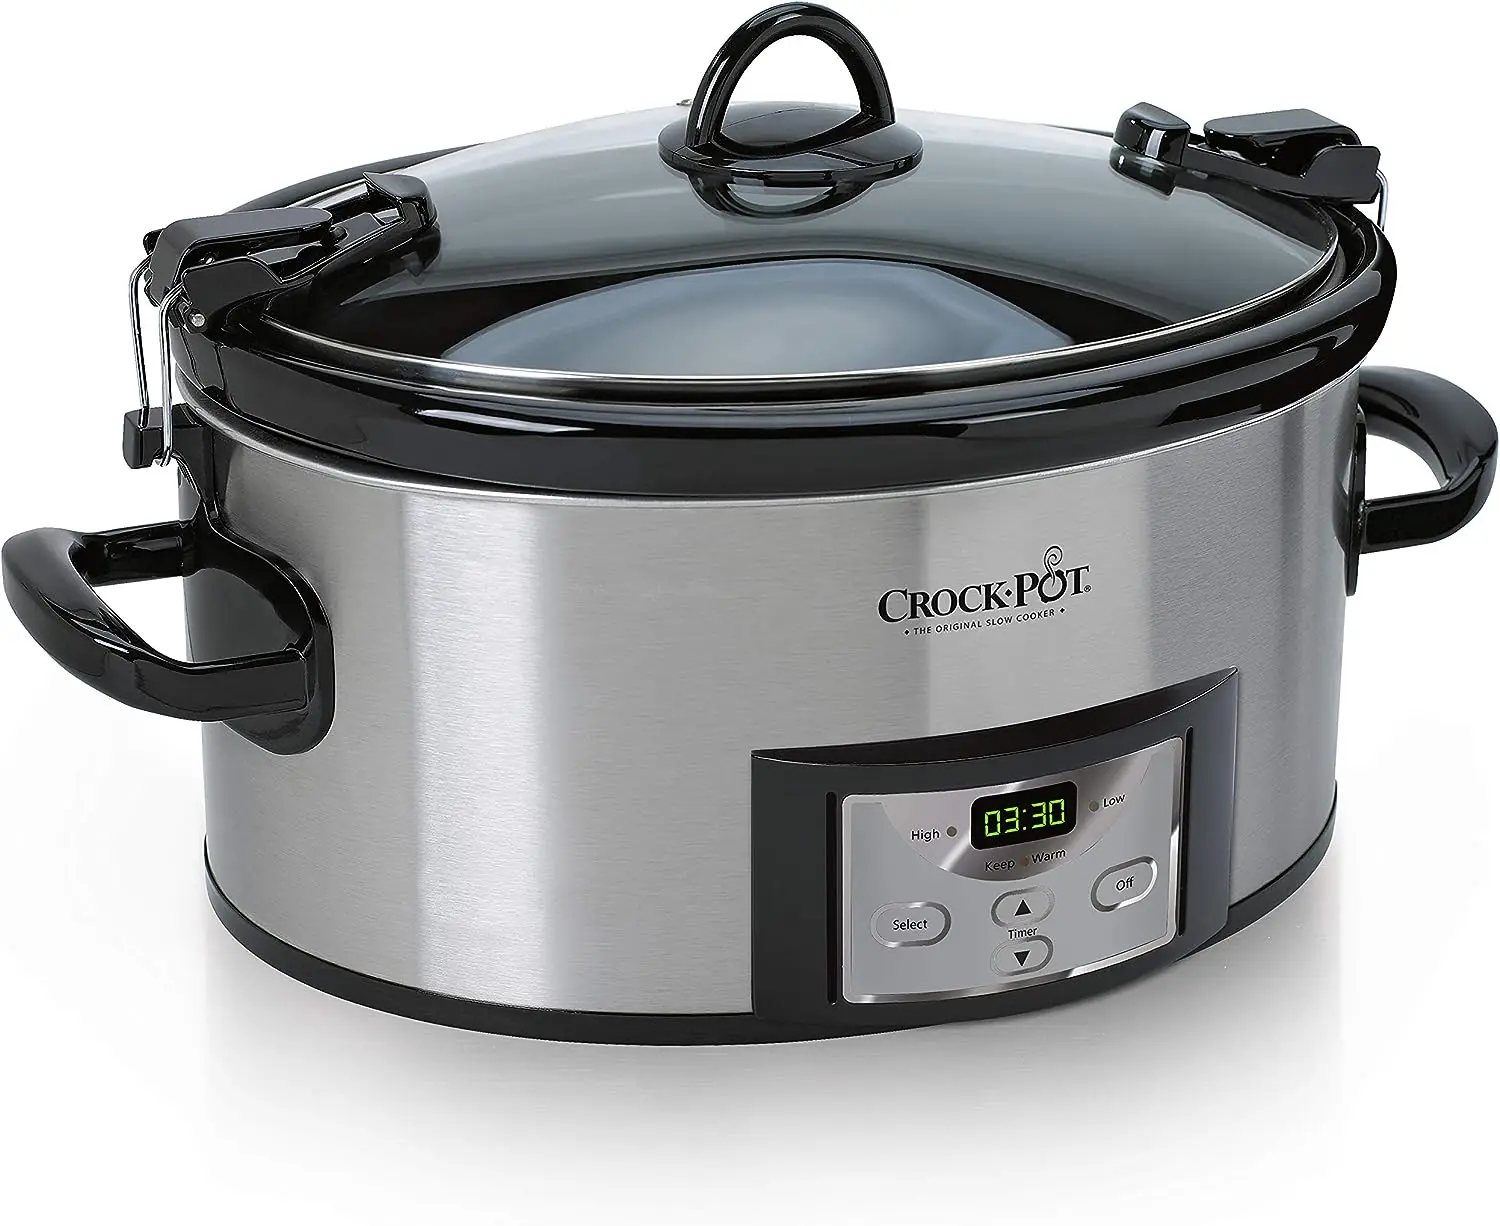 

Crock-Pot 6 Quart Cook & Carry Programmable Slow Cooker with Digital Timer, Stainless Steel (SCCPVL610-S-A)